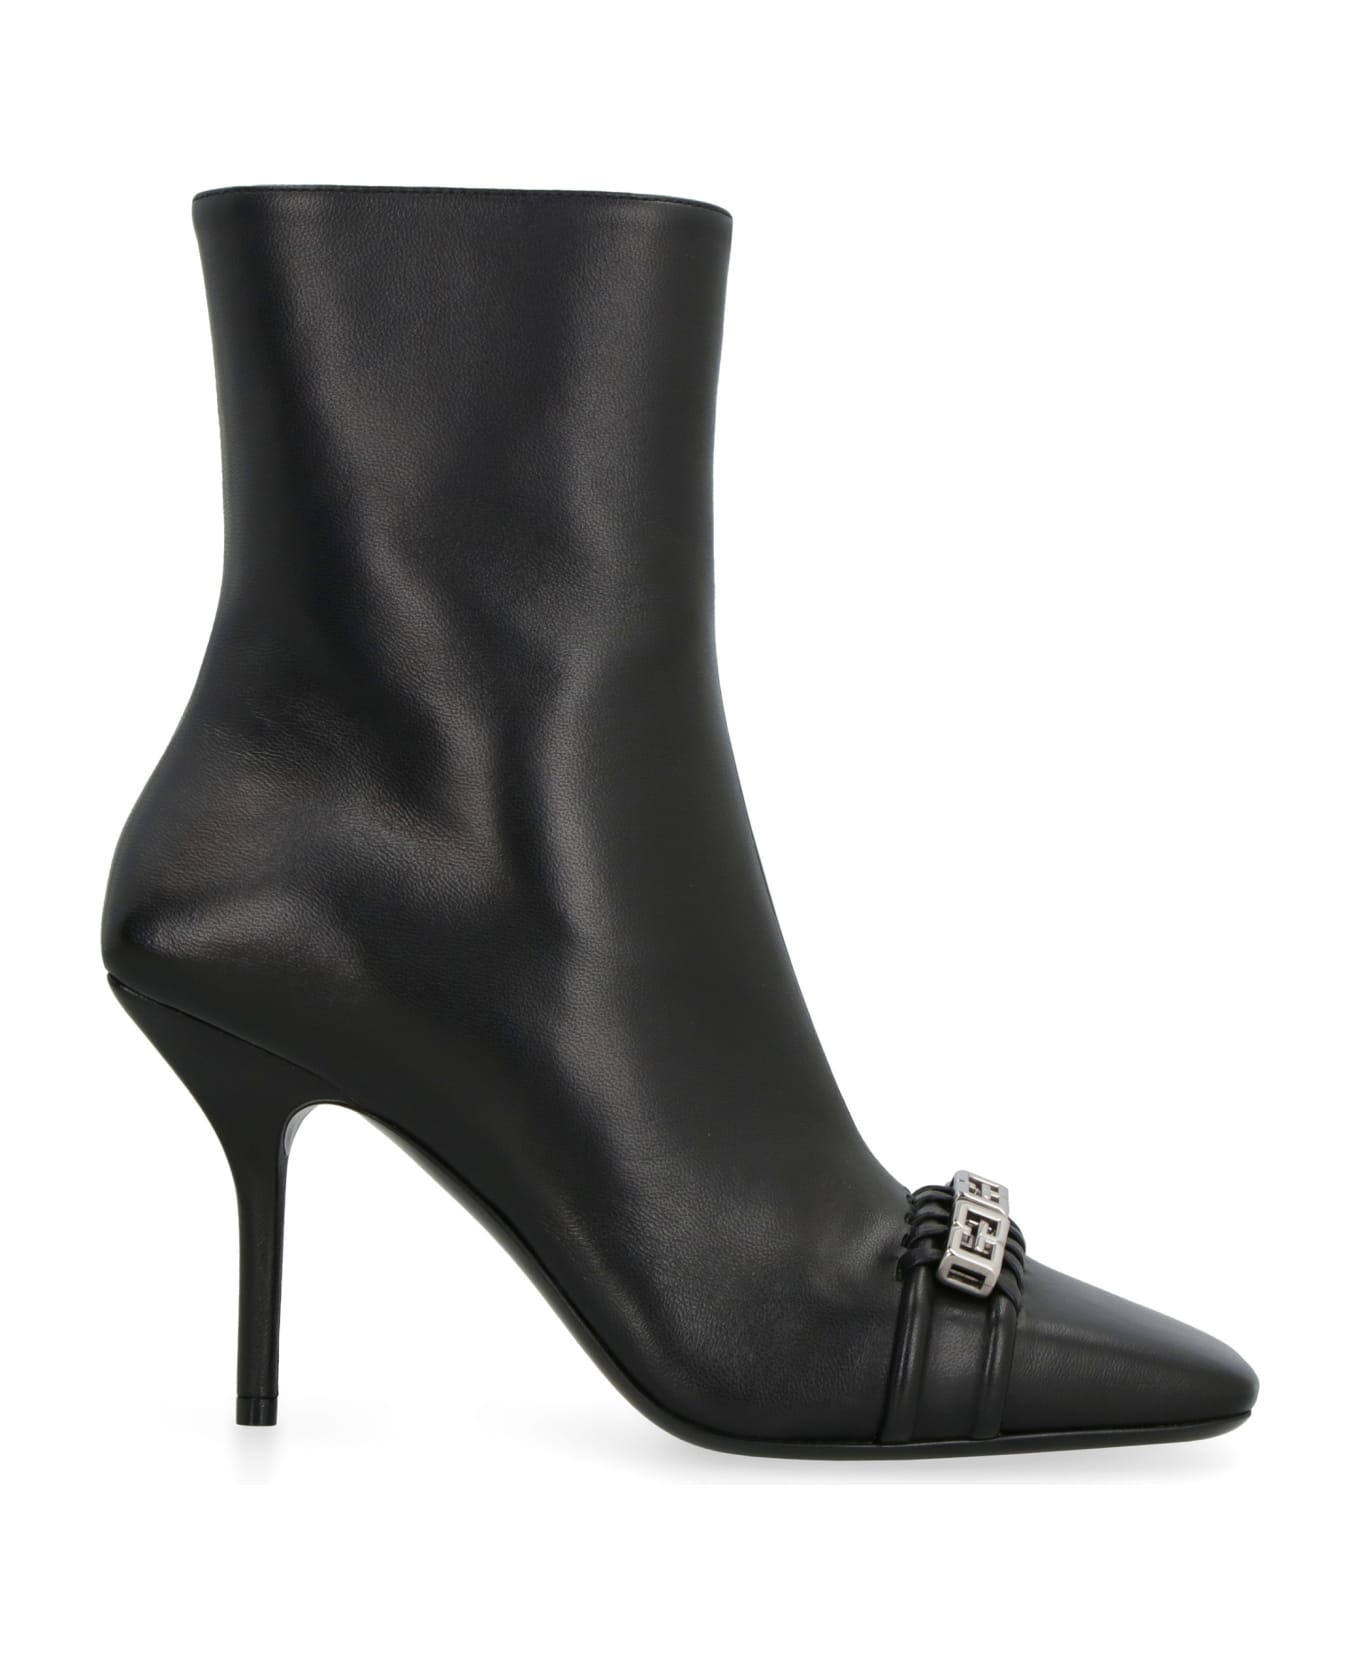 Givenchy G Woven Leather Ankle Boots - black